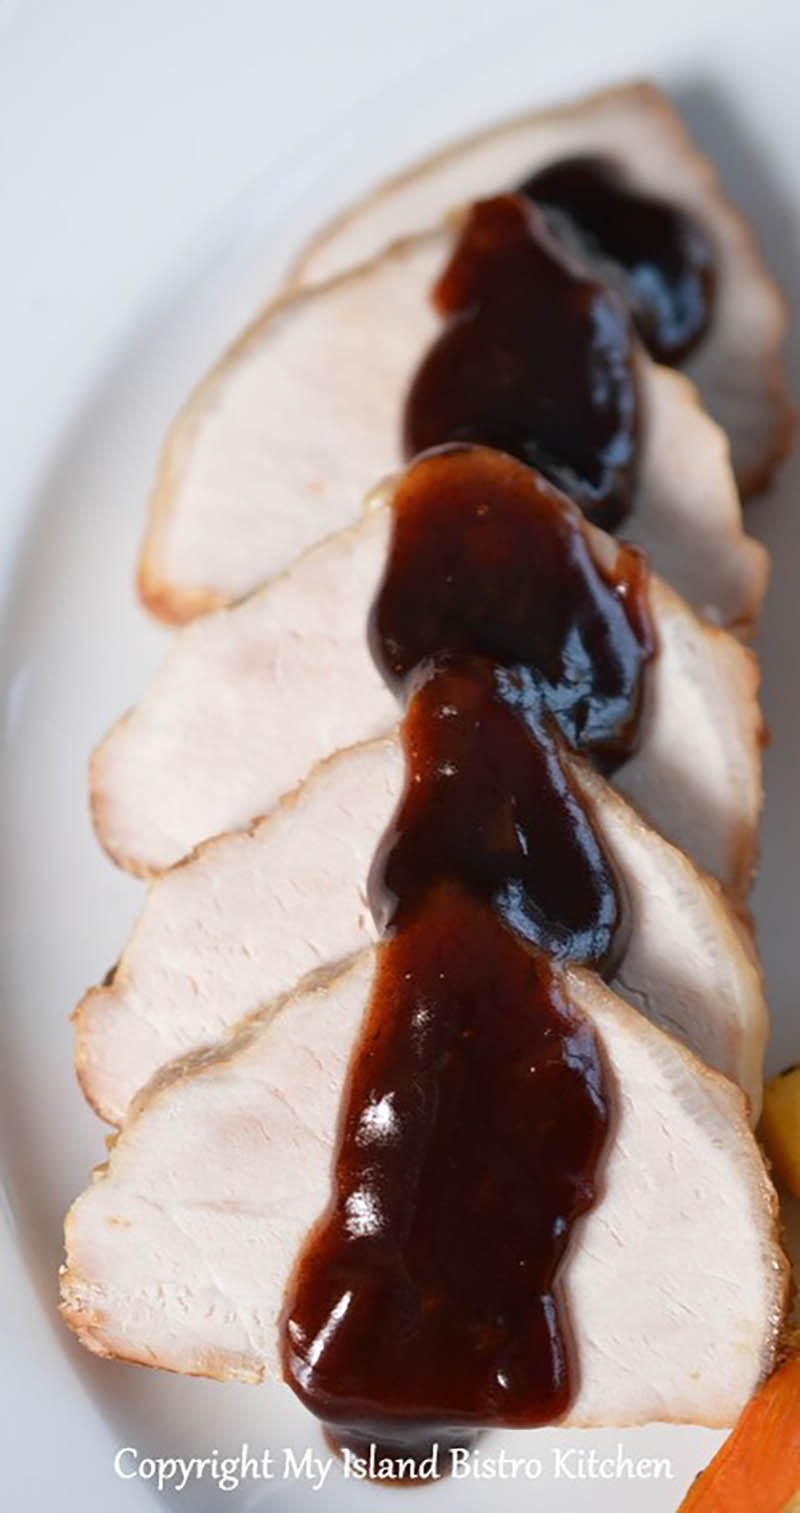 Pork Loin Roast with Pomegranate, Red Wine and Black Garlic Sauce